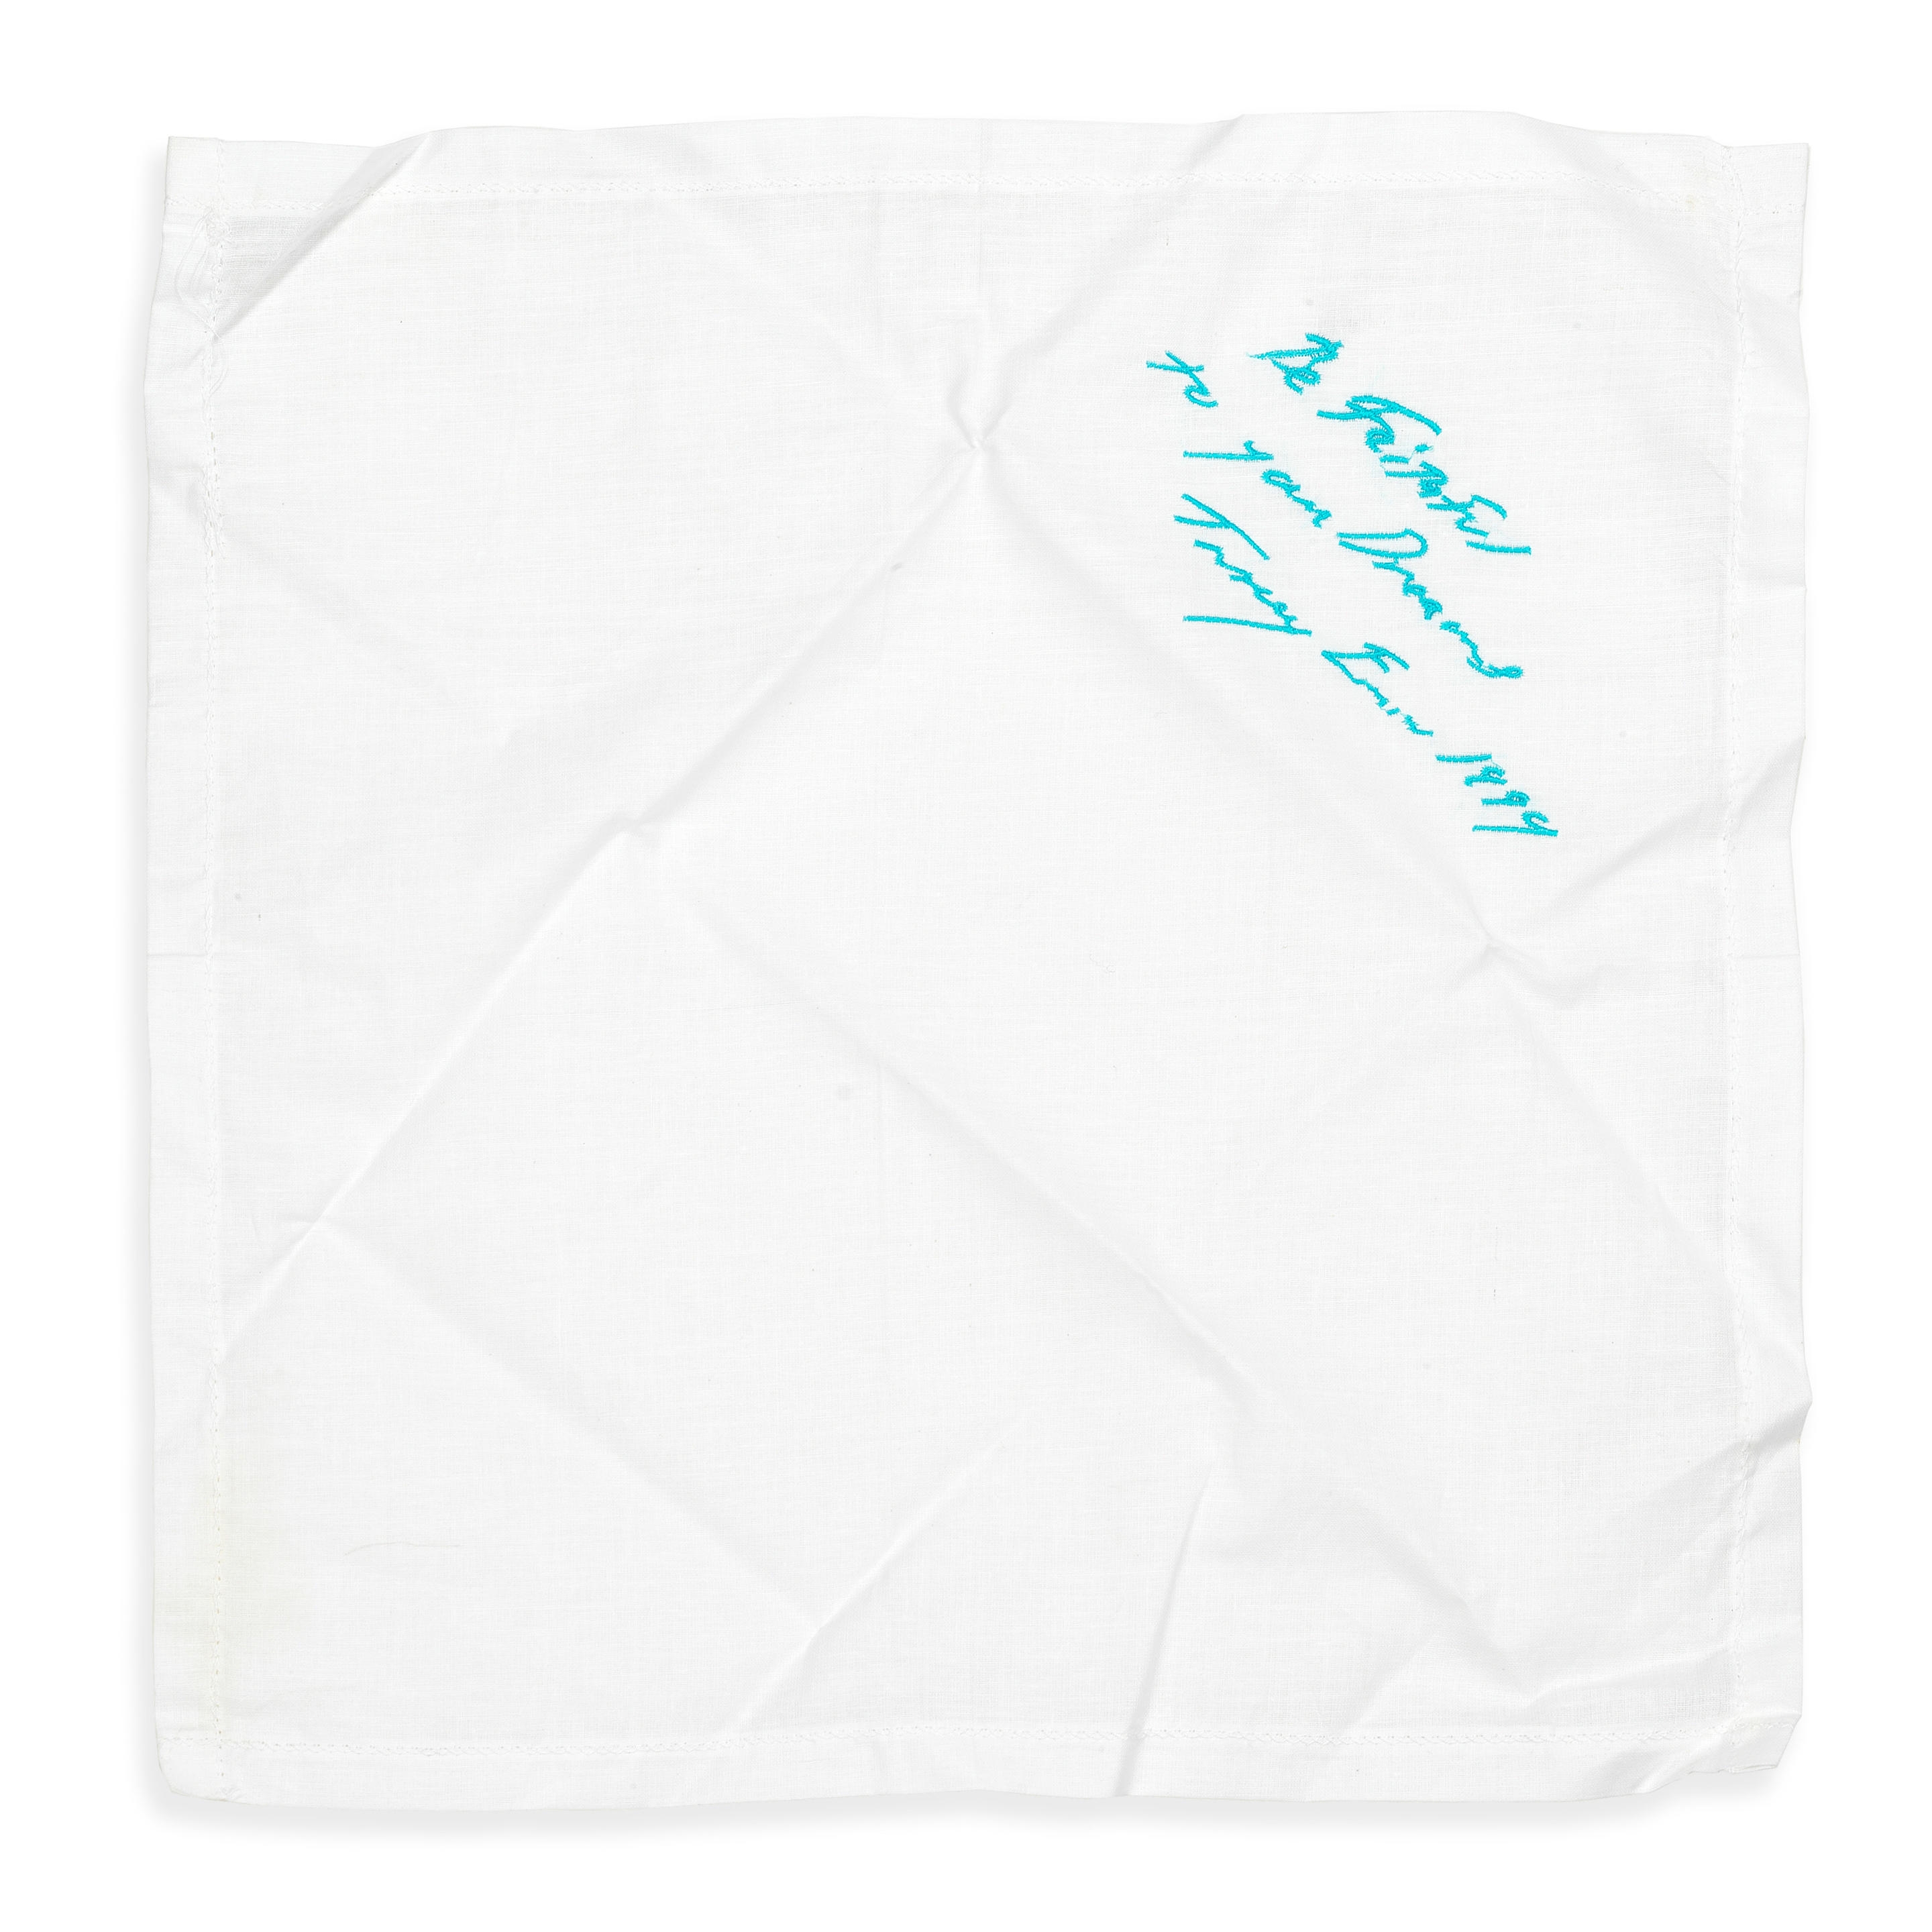 Tracey Emin, TRACEY EMIN X LONGCHAMP ALWAYS ME LE PLIAGE BAG WITH  ROSETTE LTD EDITION (2004)